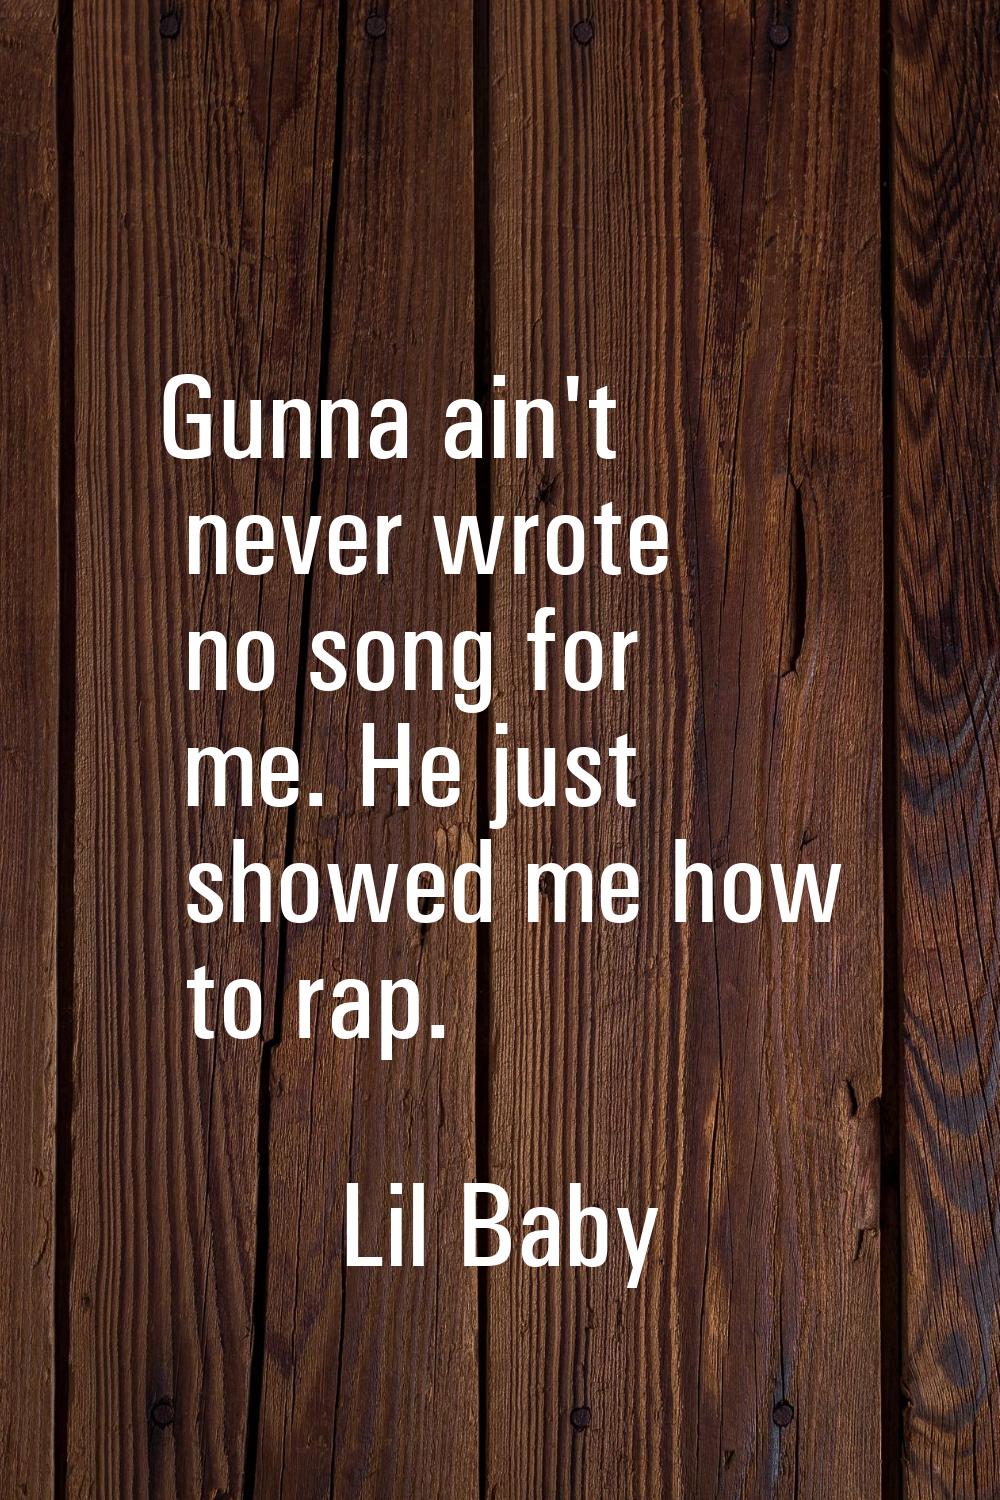 Gunna ain't never wrote no song for me. He just showed me how to rap.